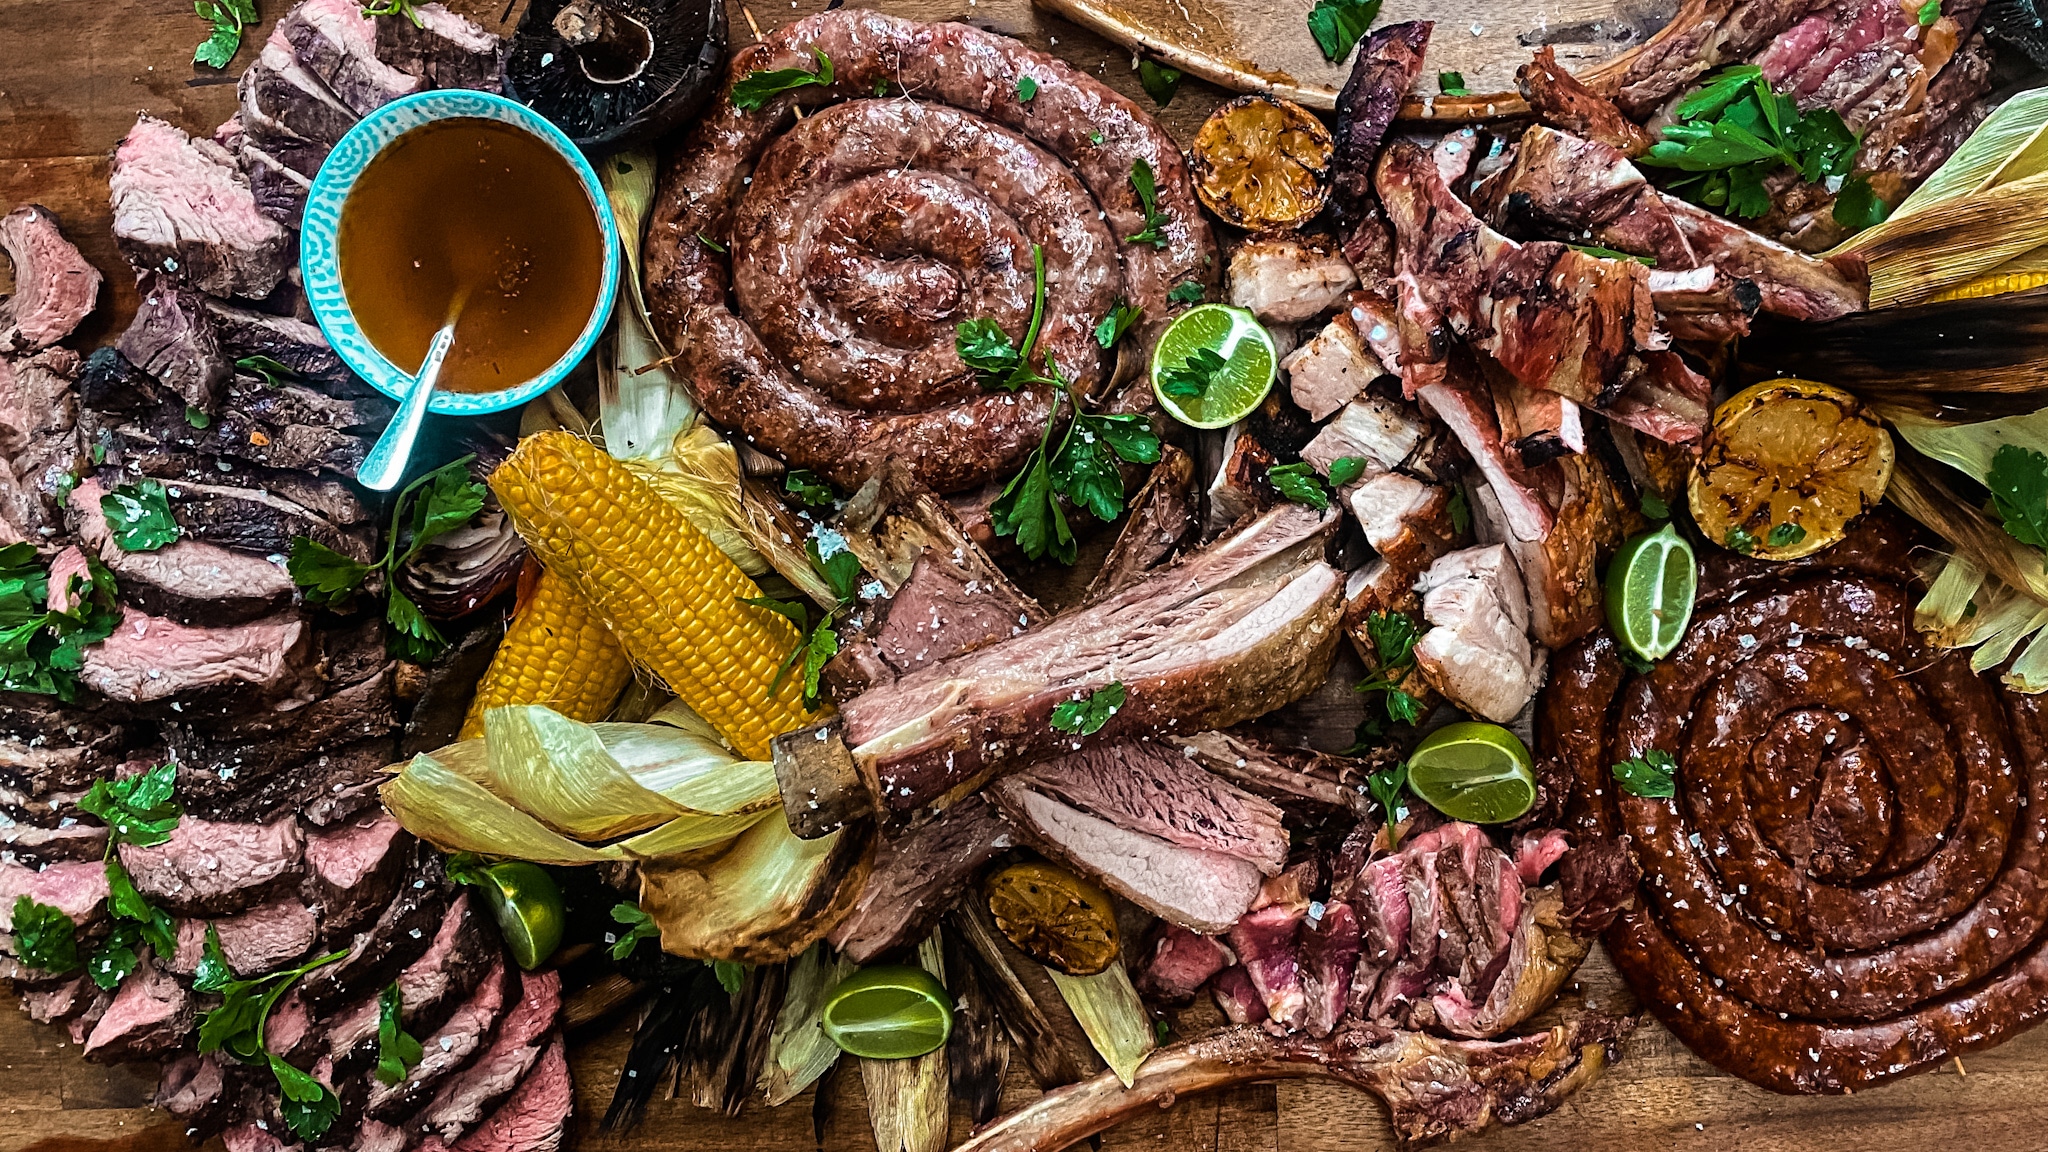 Asado barbecue aregntina Meat platter